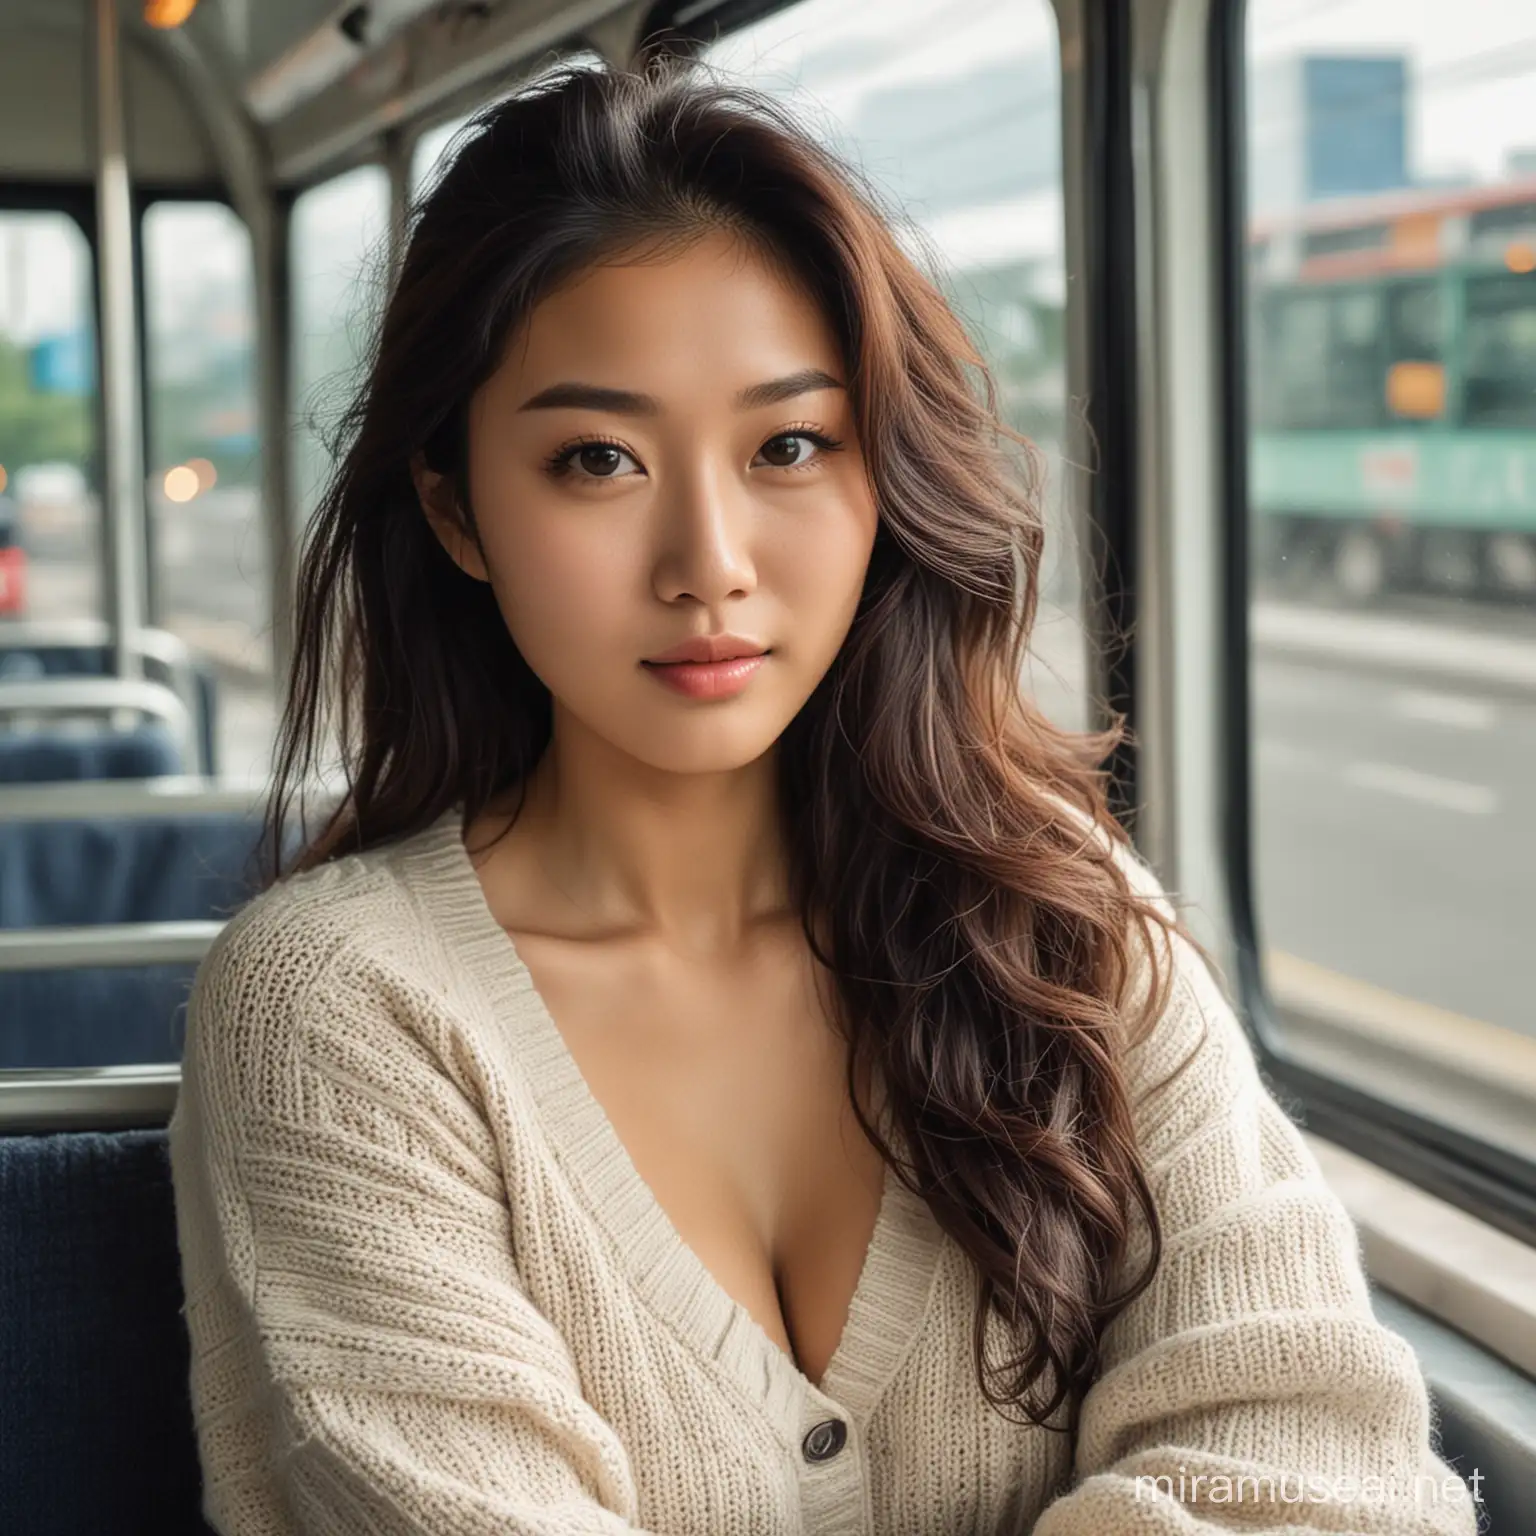 Stylish Asian Woman with Wavy Hair in Morning Bus Commute